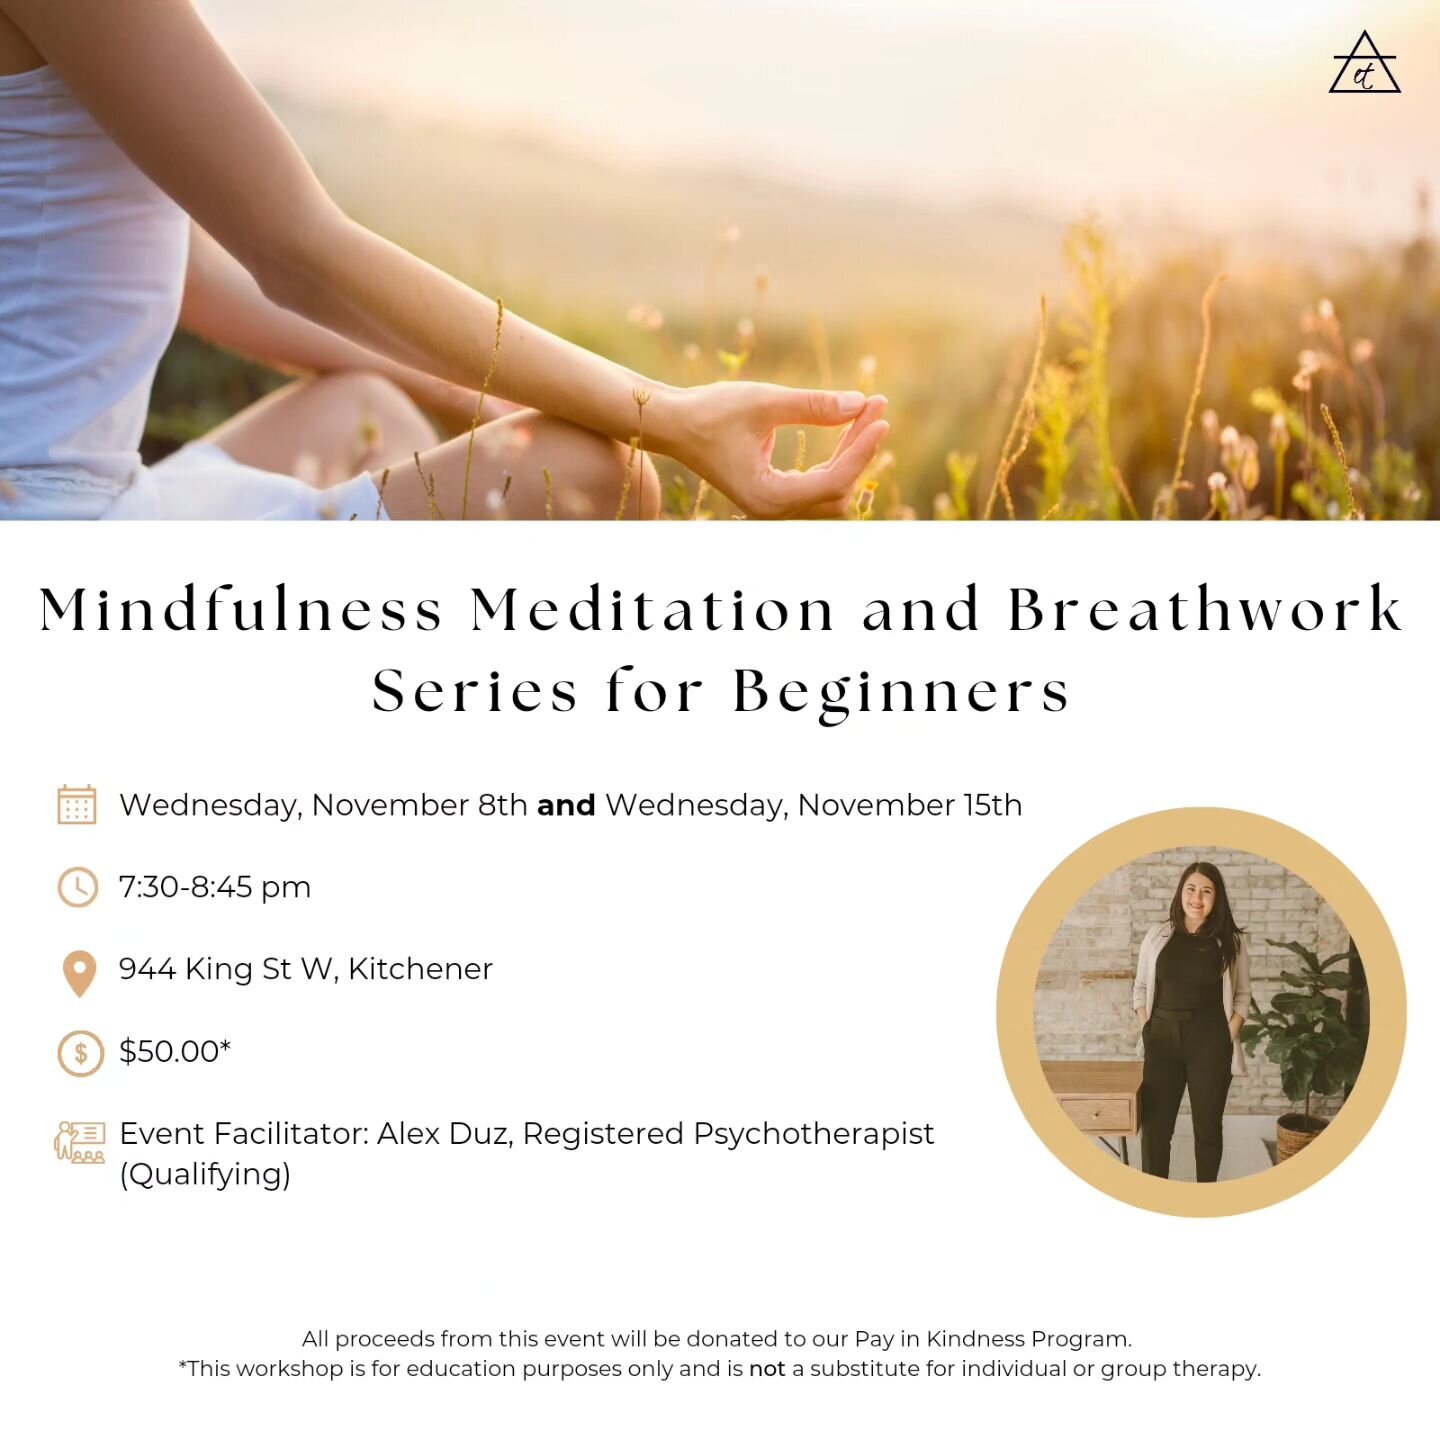 Practices of mindfulness meditation and breathwork can offer immense benefits including stress reduction, improved focus, nervous system regulation, enhanced self awareness, better sleep, increased energy, clarity, and relaxation.

Join Alex Duz, RP 